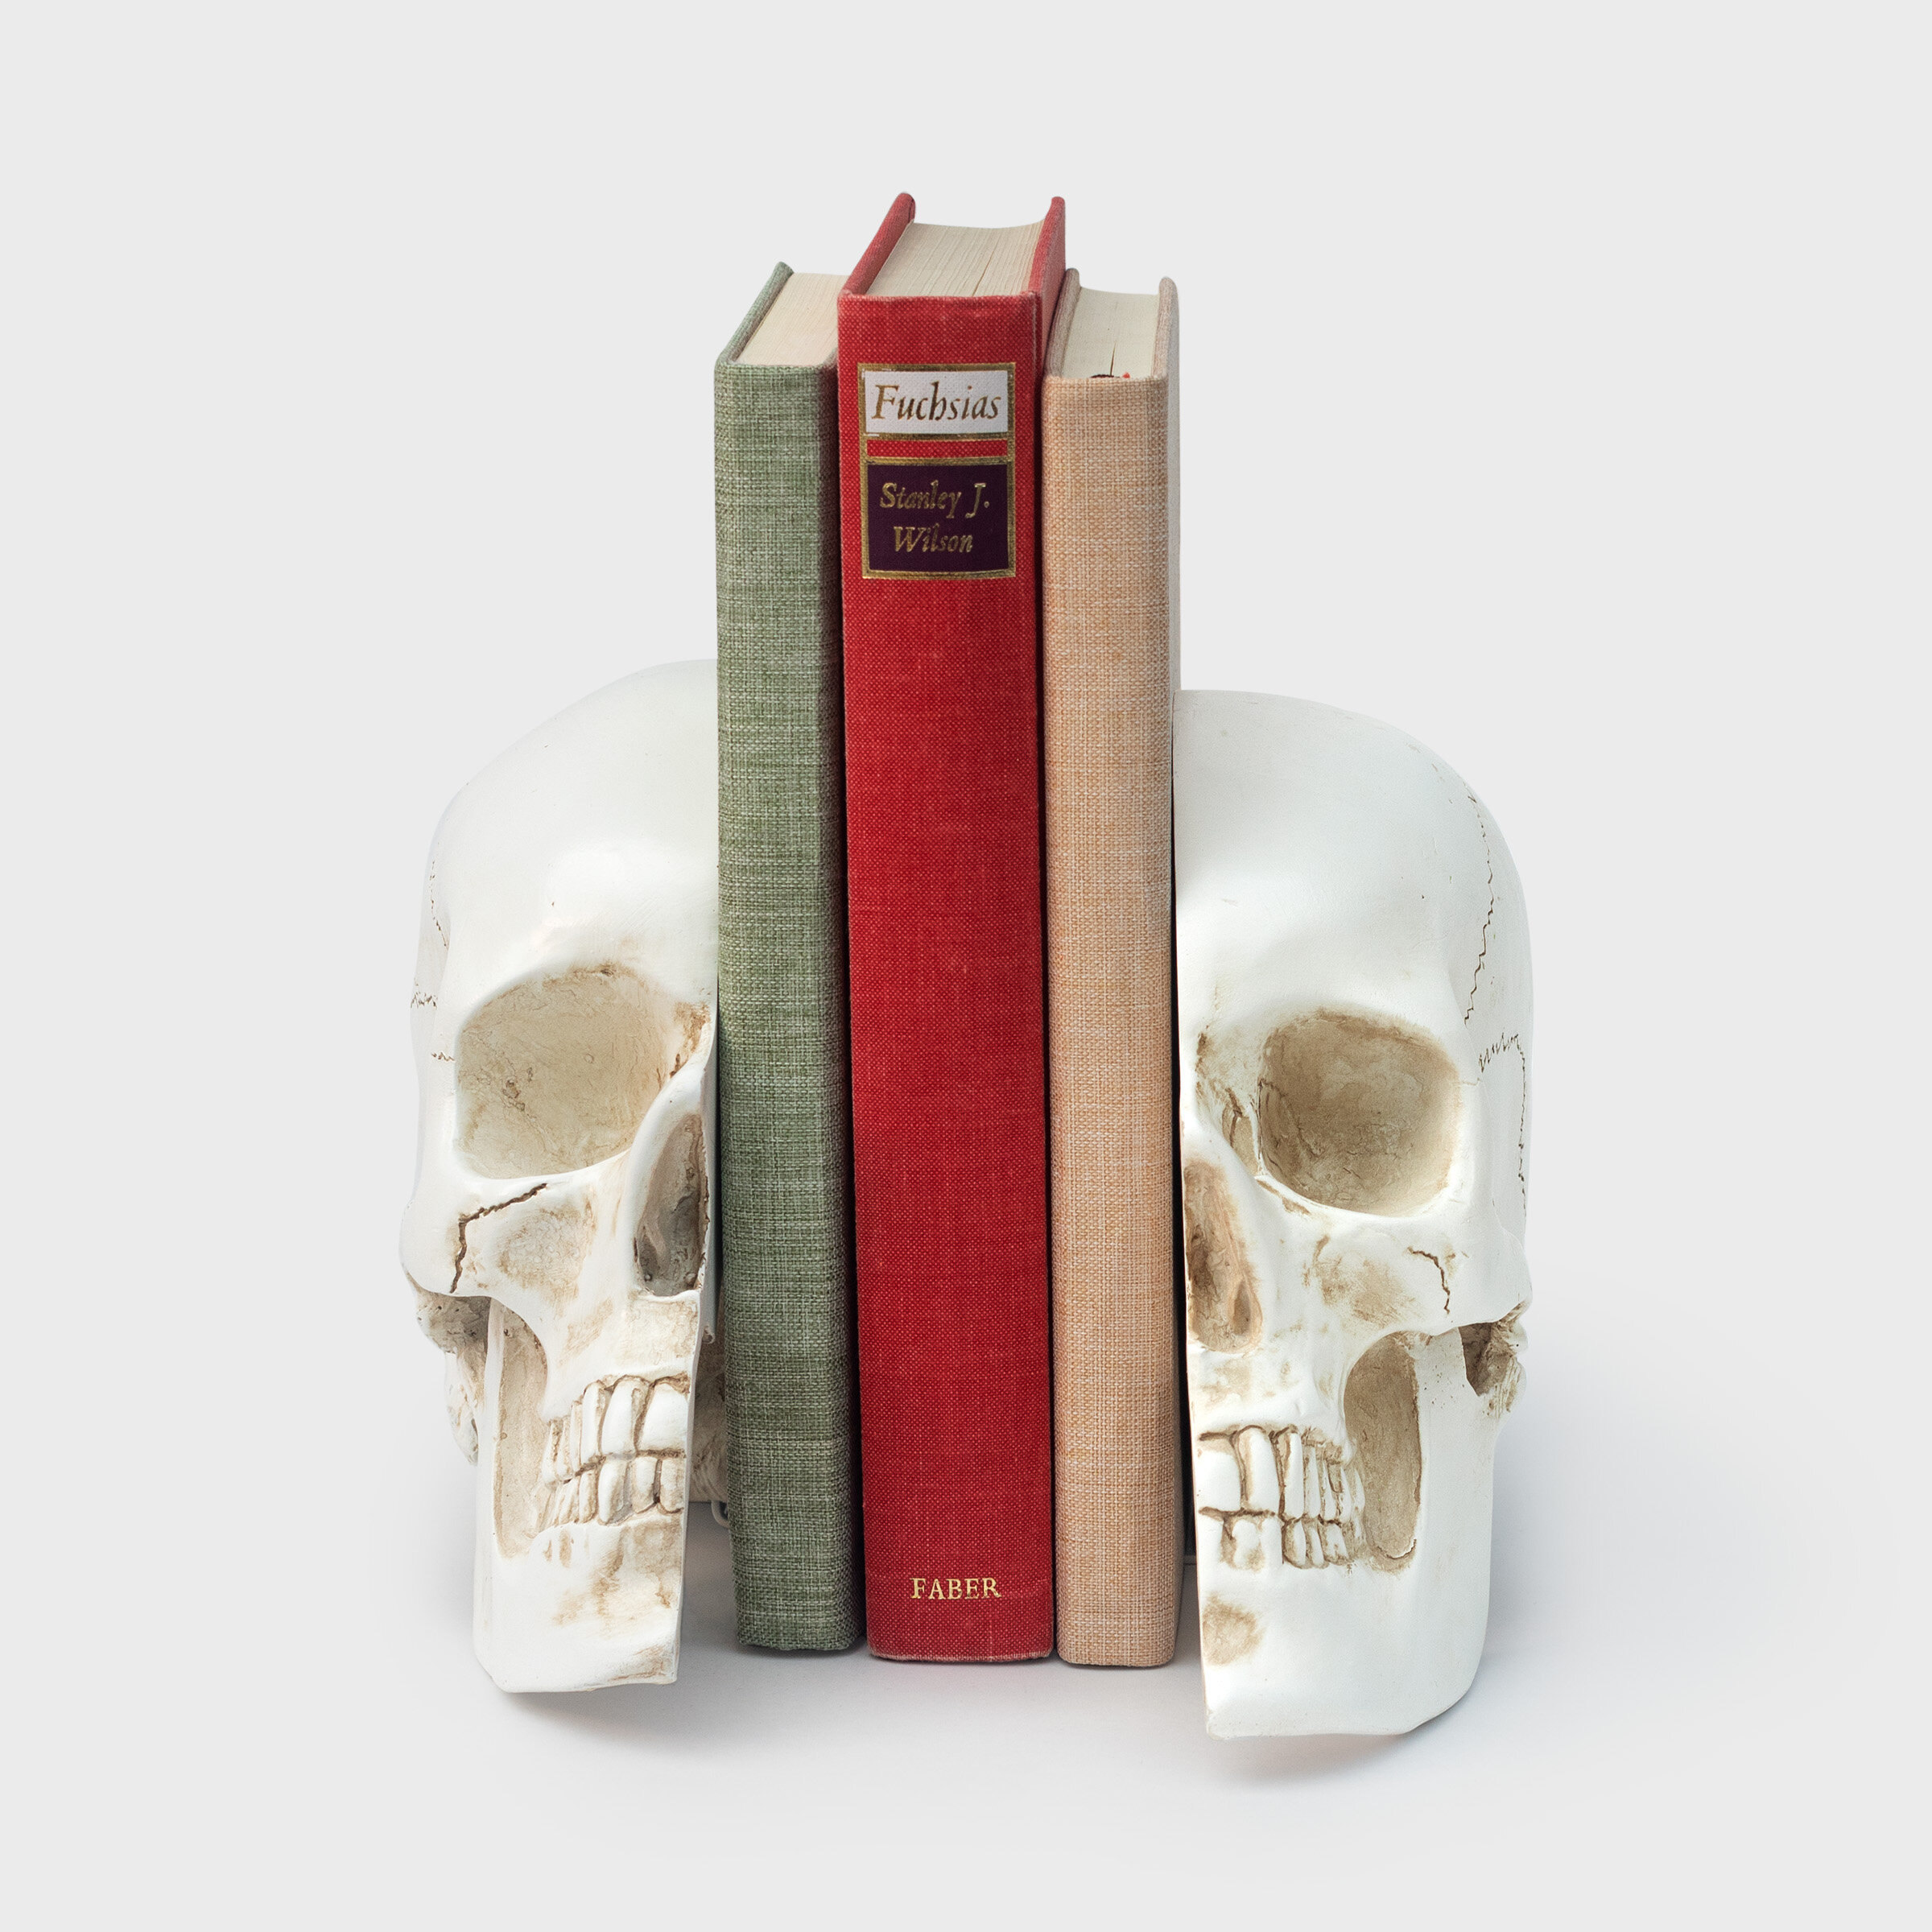 skull shaped bookends holding three books